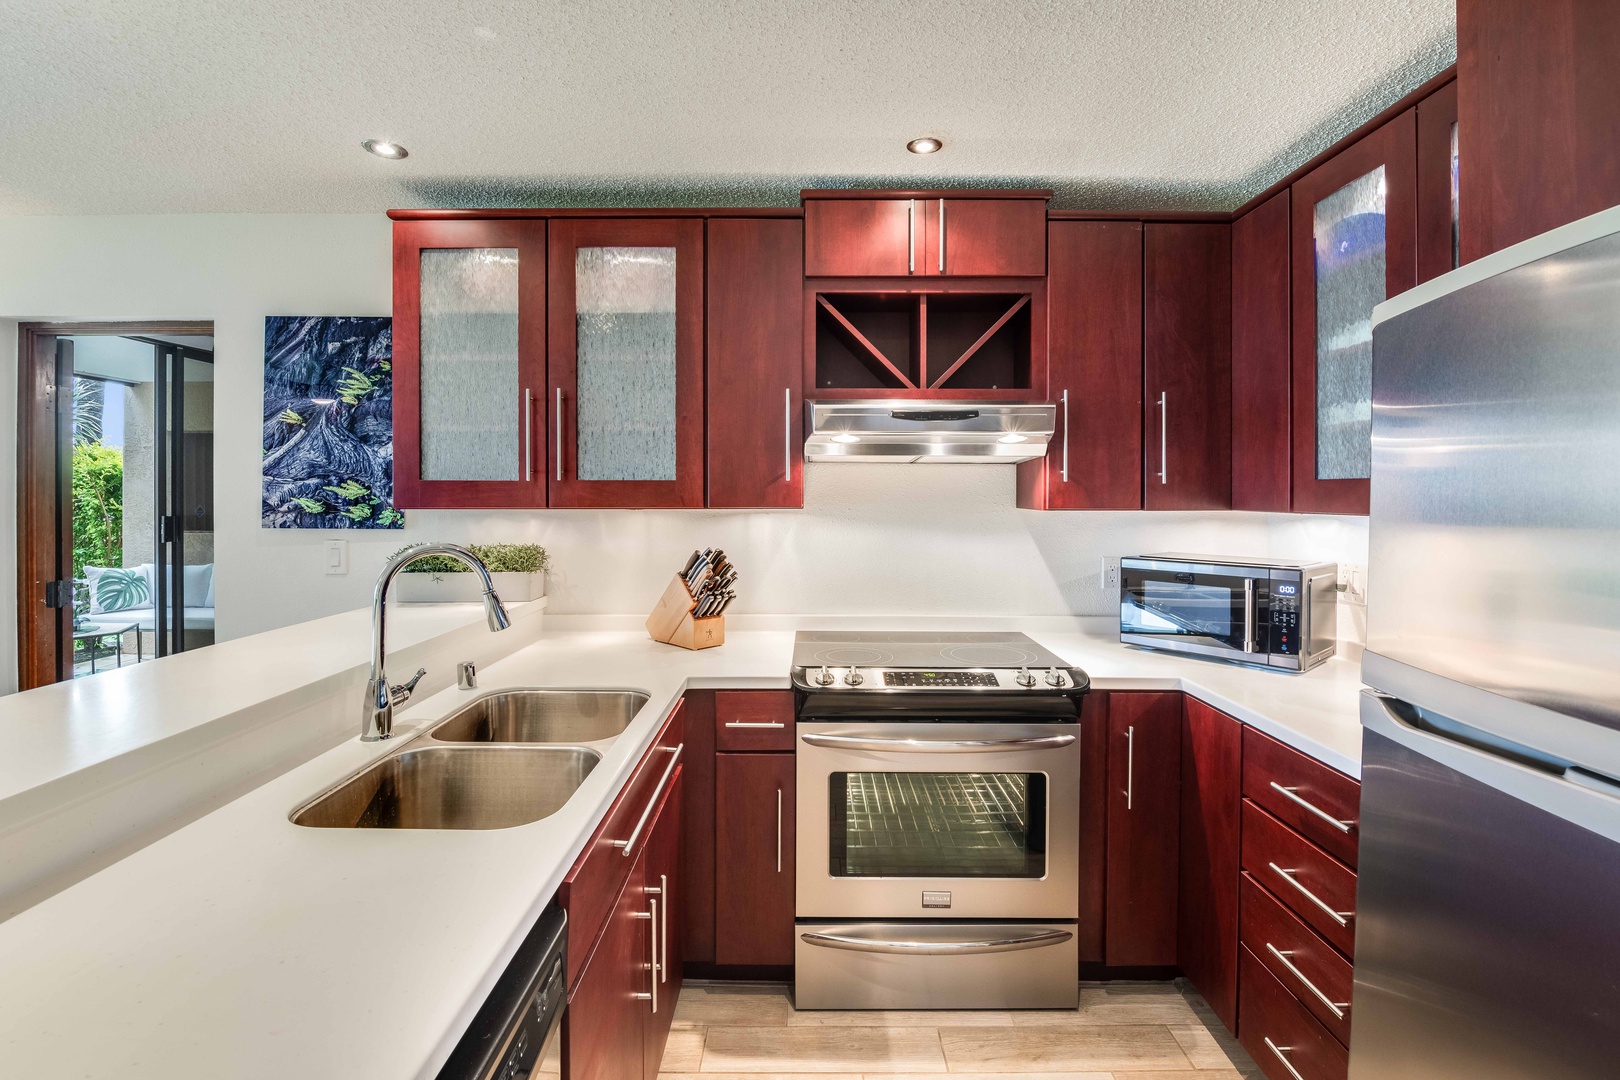 Waikoloa Vacation Rentals, Waikoloa Villas A107 - Beautiful Fully Equipped Kitchen w/ Stainless Steel Appliances